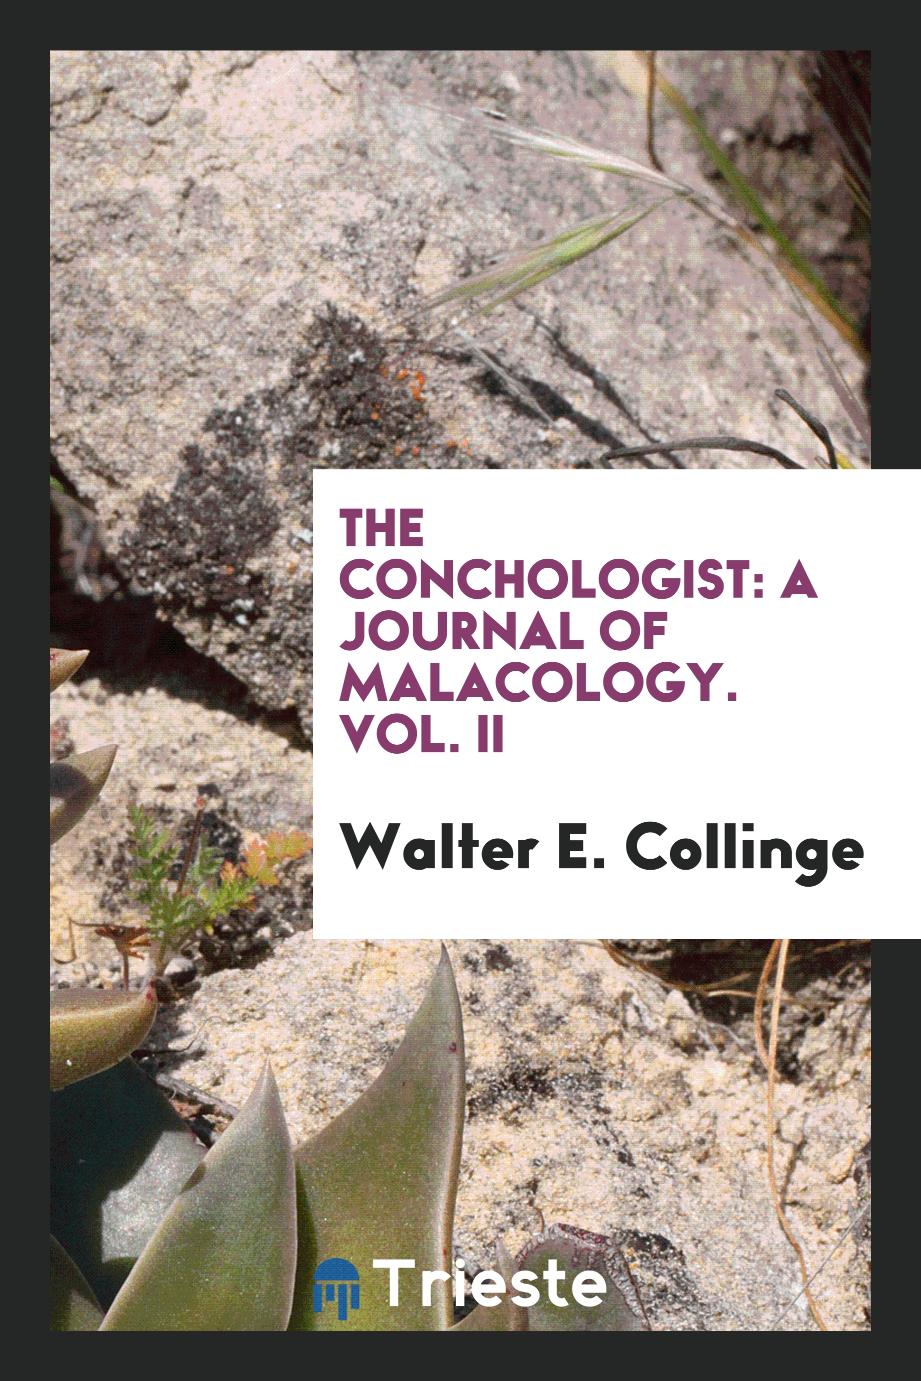 The Conchologist: A Journal of Malacology. Vol. II